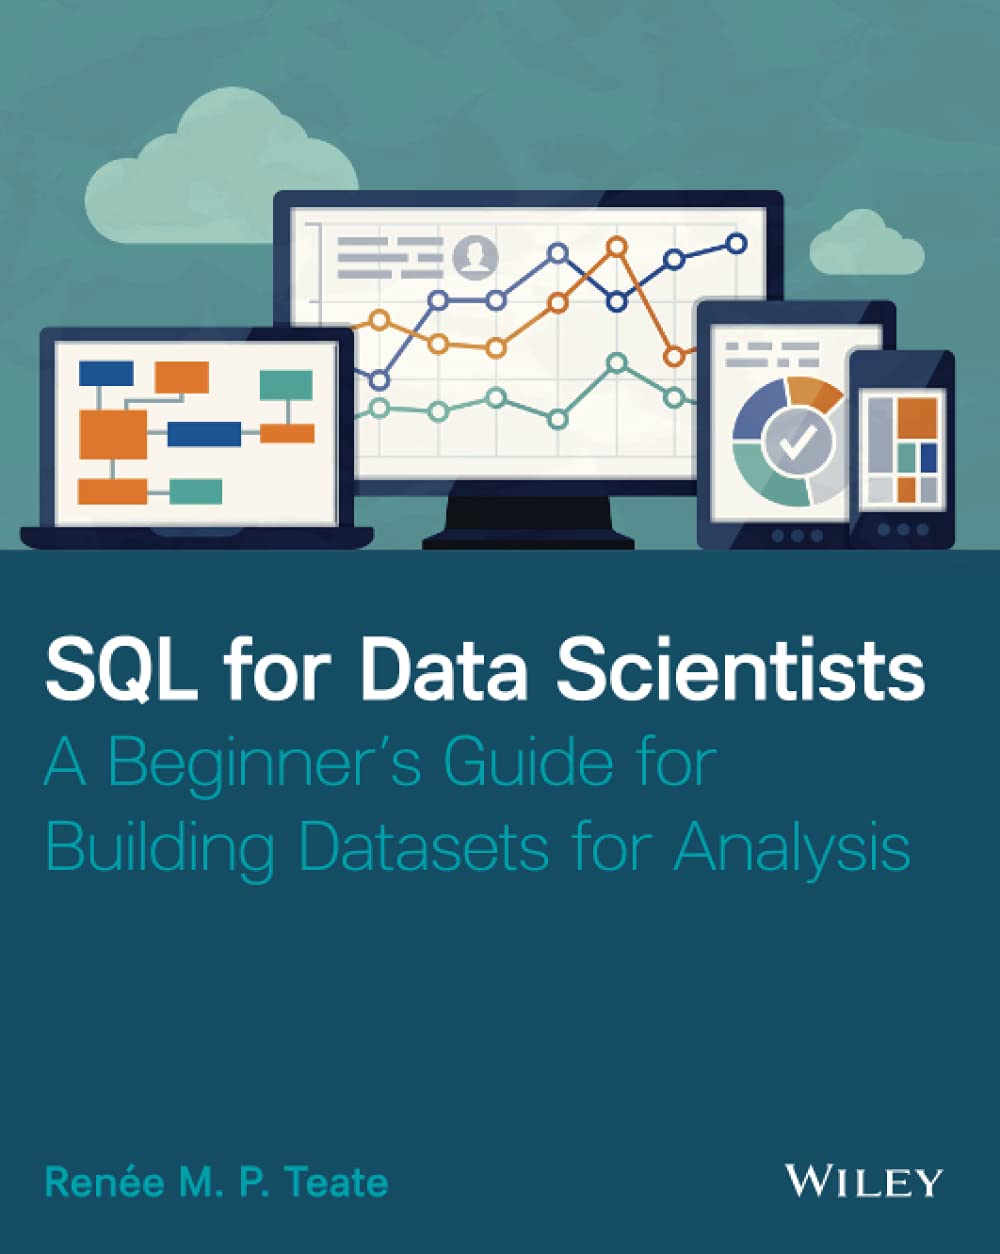 "SQL for Data Scientists" by Renee M.P. Teate